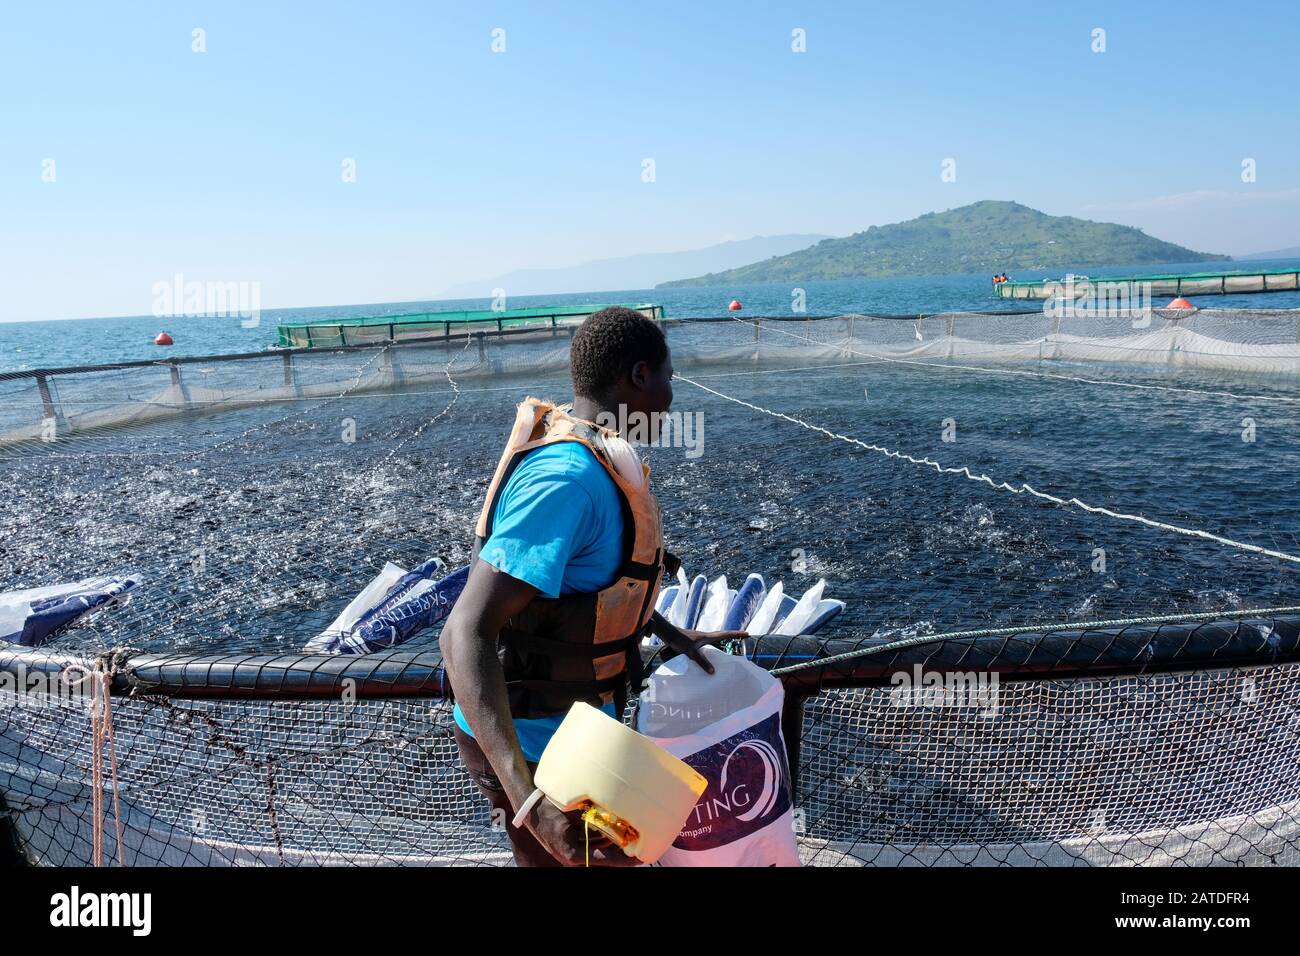 An employee of Victory Farms, the largest fish farmer in Kenya, feeds fish inside a fish cage in Lake Victoria Stock Photo